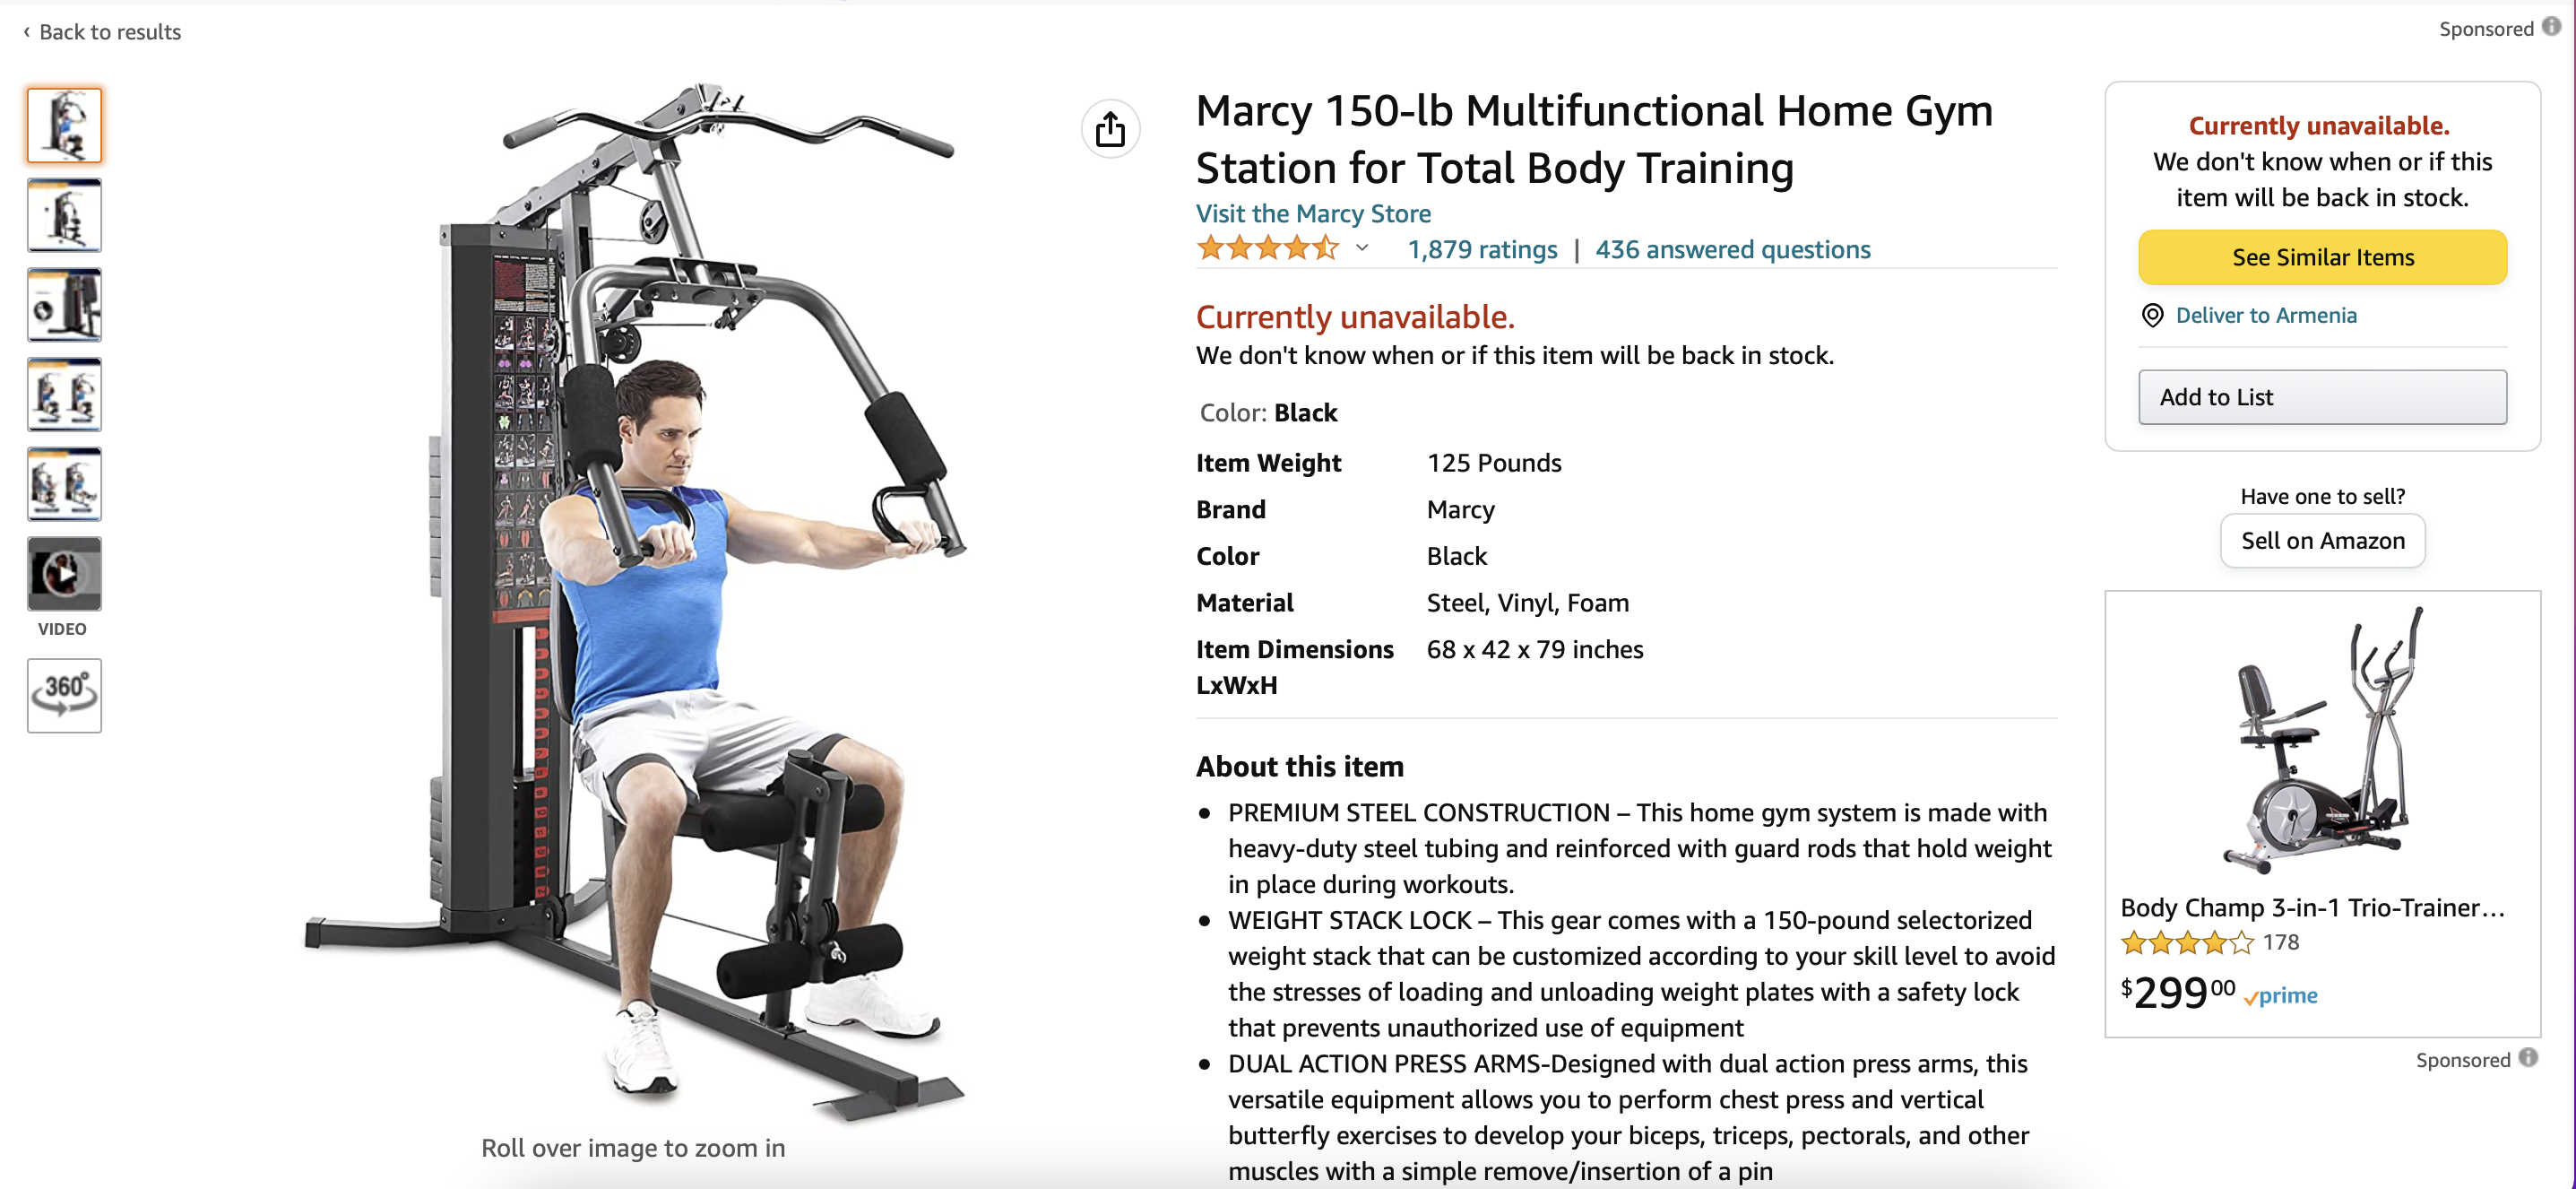 Amazon startup ideas: Workout products 